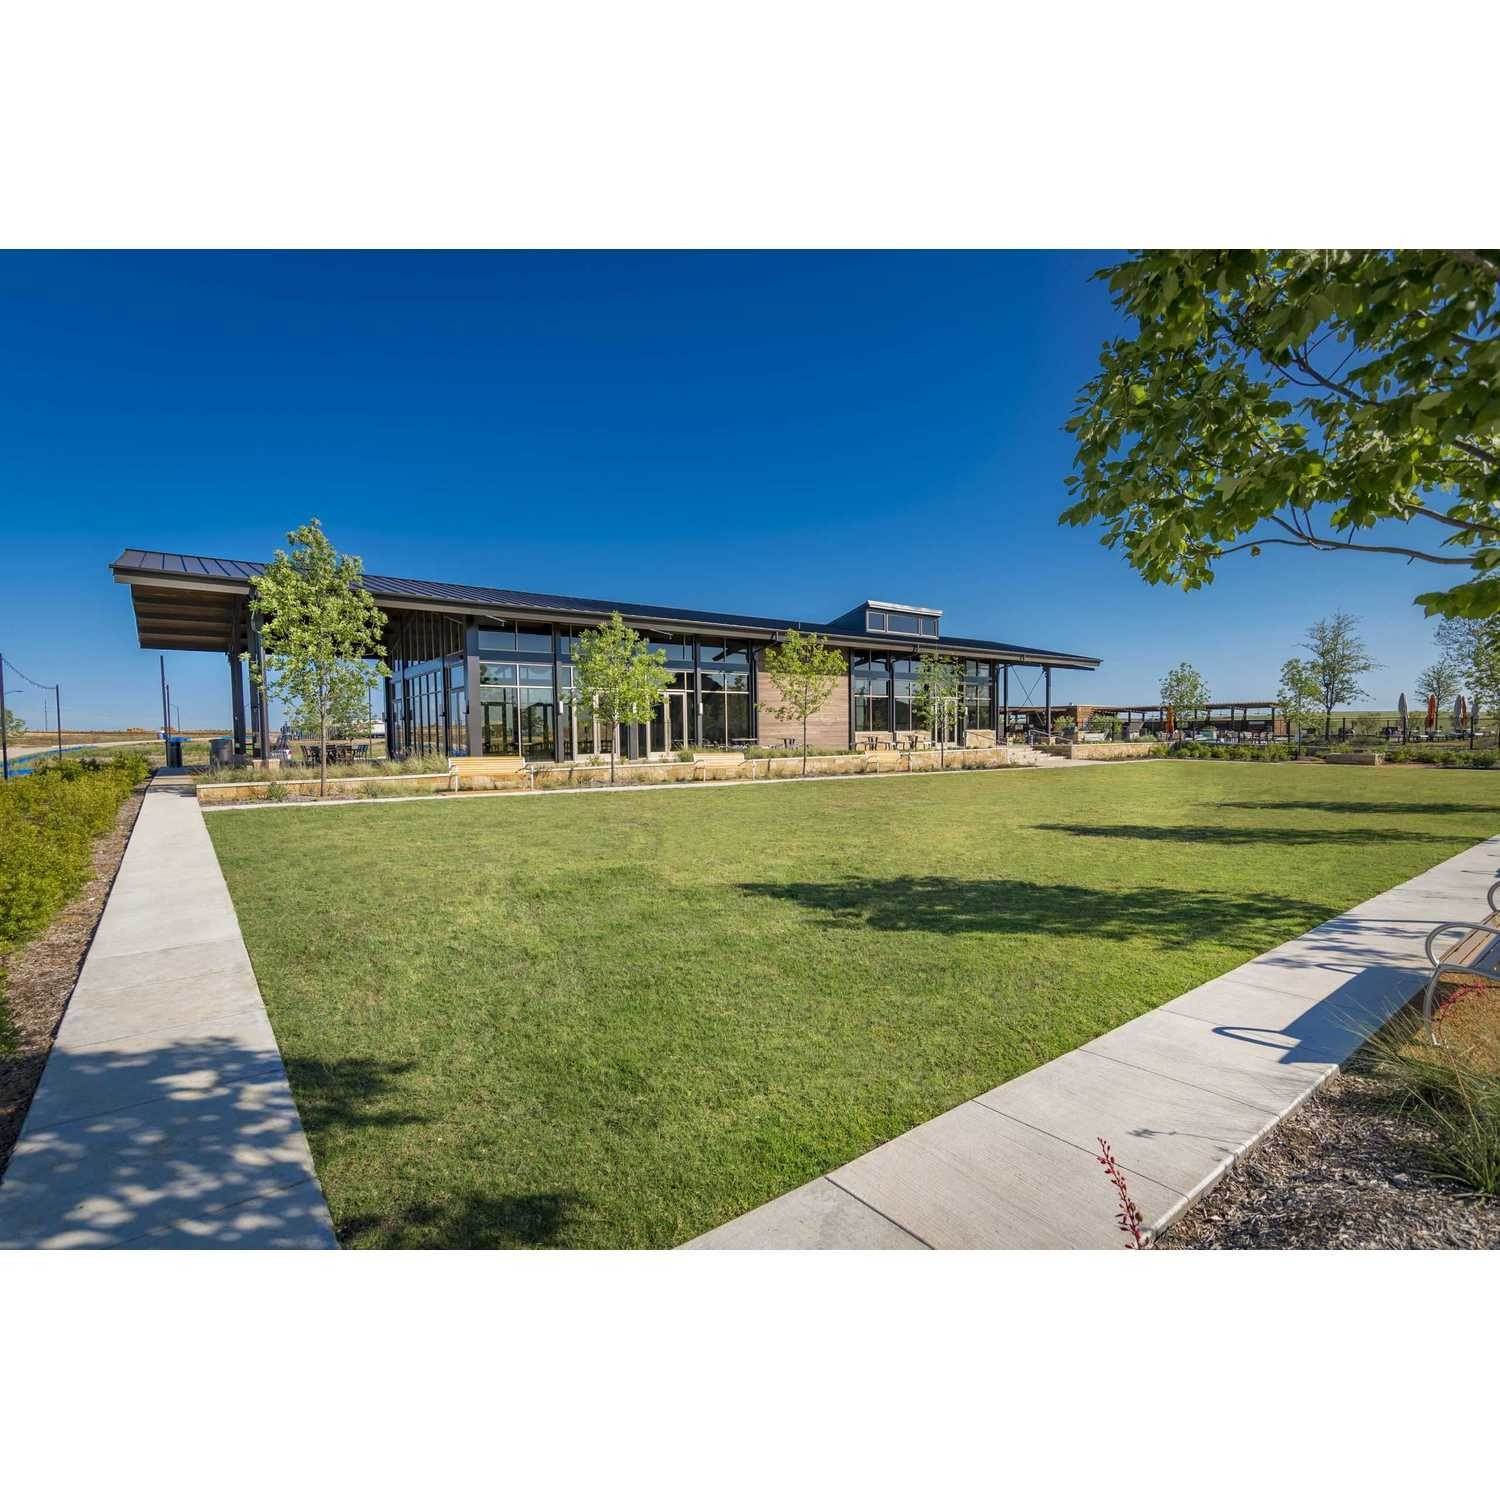 3. Tavolo Park 60ft. lots building at 6221 Whitebrush Place, Fort Worth, TX 76132